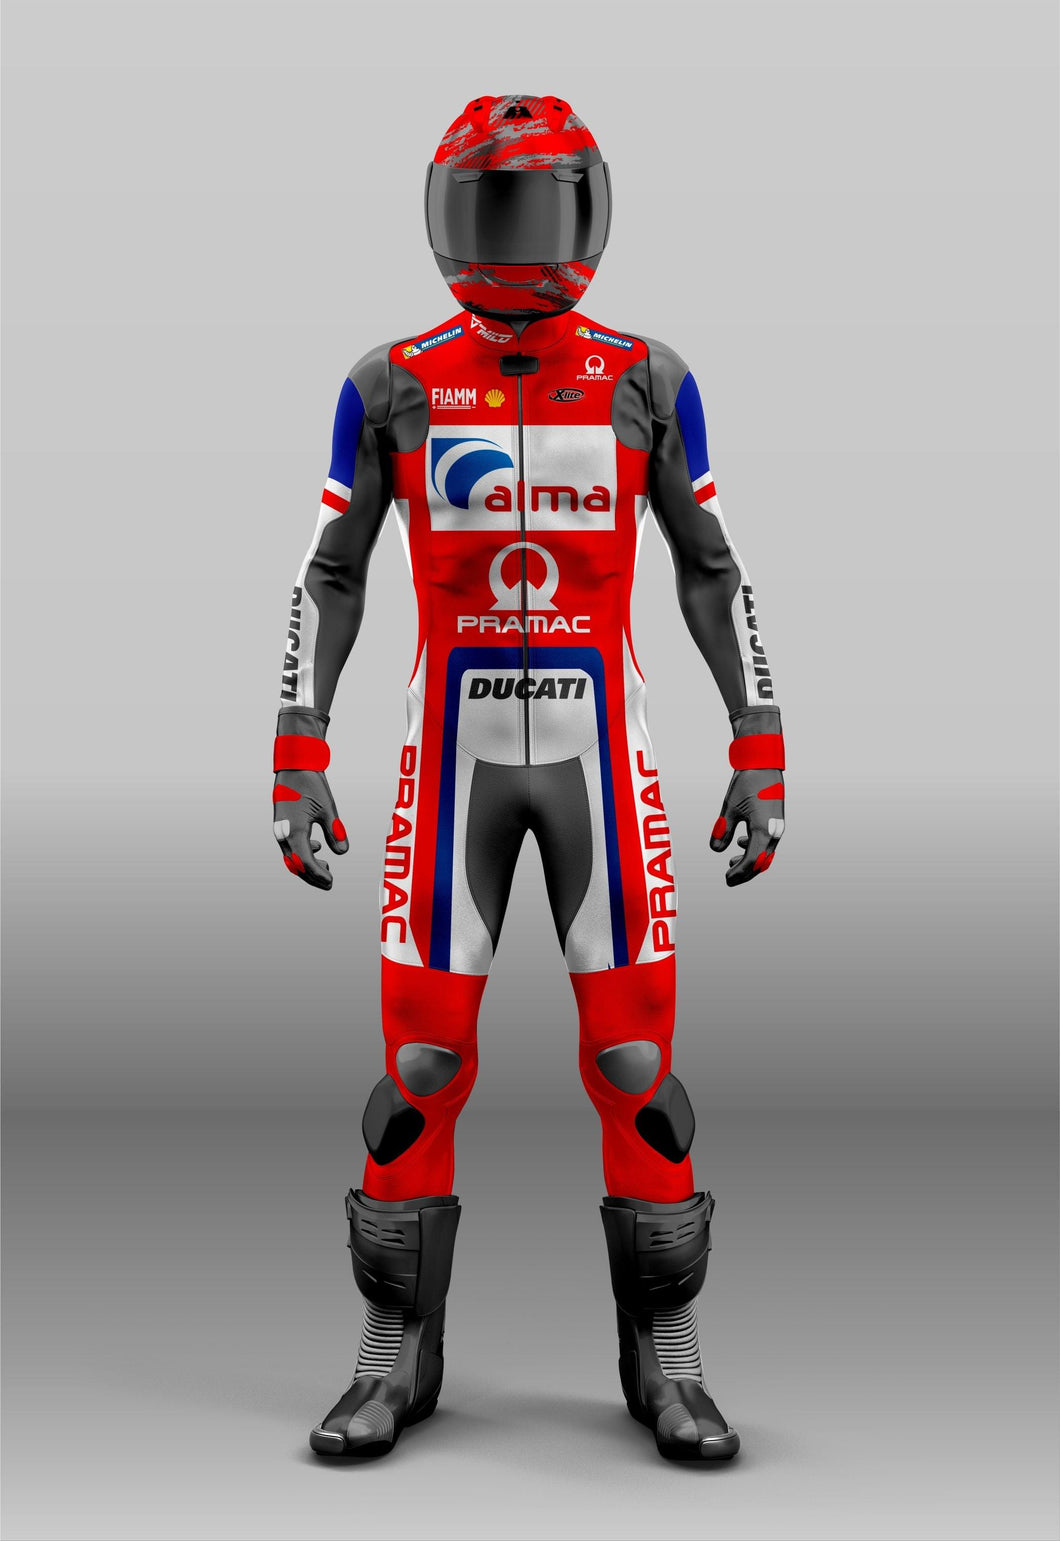 Custom Ducati MotoGP Racing Suit - Made For Great Performance & Safety - Motorcycle Riding Gear Leather Racing - Available in All sizes - Unisex